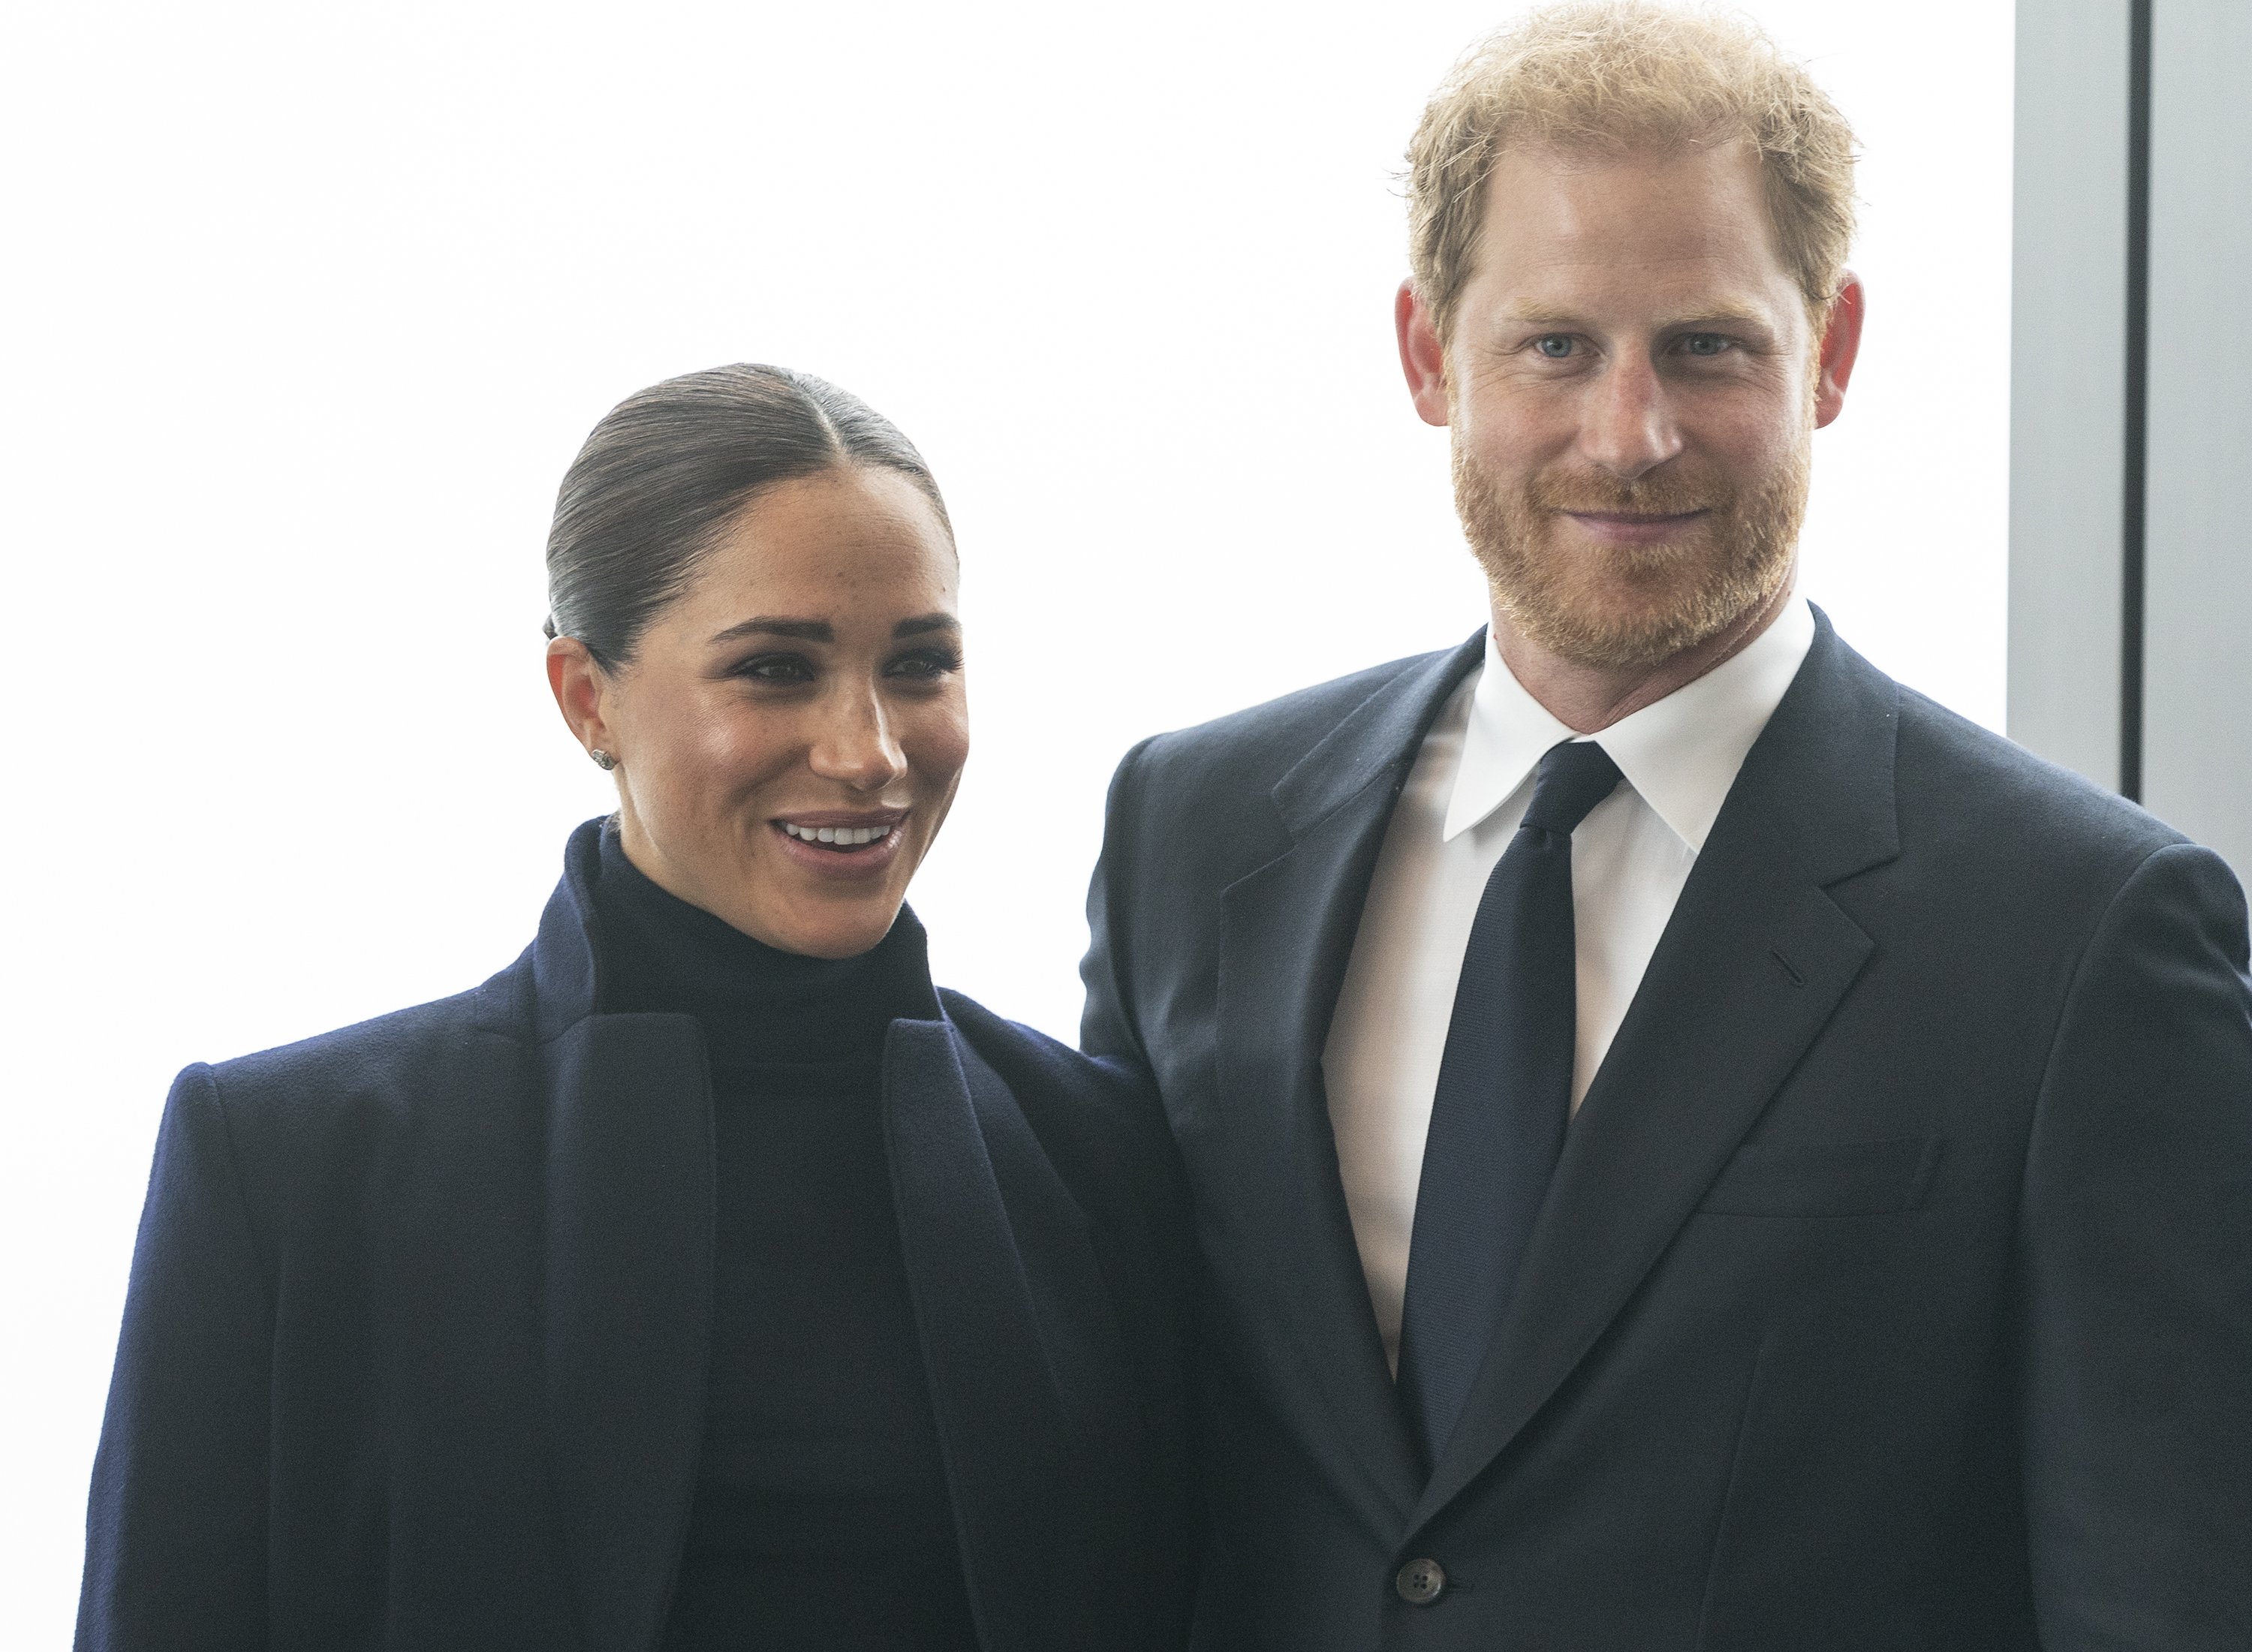  The Duke and Duchess of Sussex, Prince Harry and Meghan visit One World Observatory on 102nd floor of Freedom Tower of World Trade Center on September 23, 2021 | Source: Getty Images